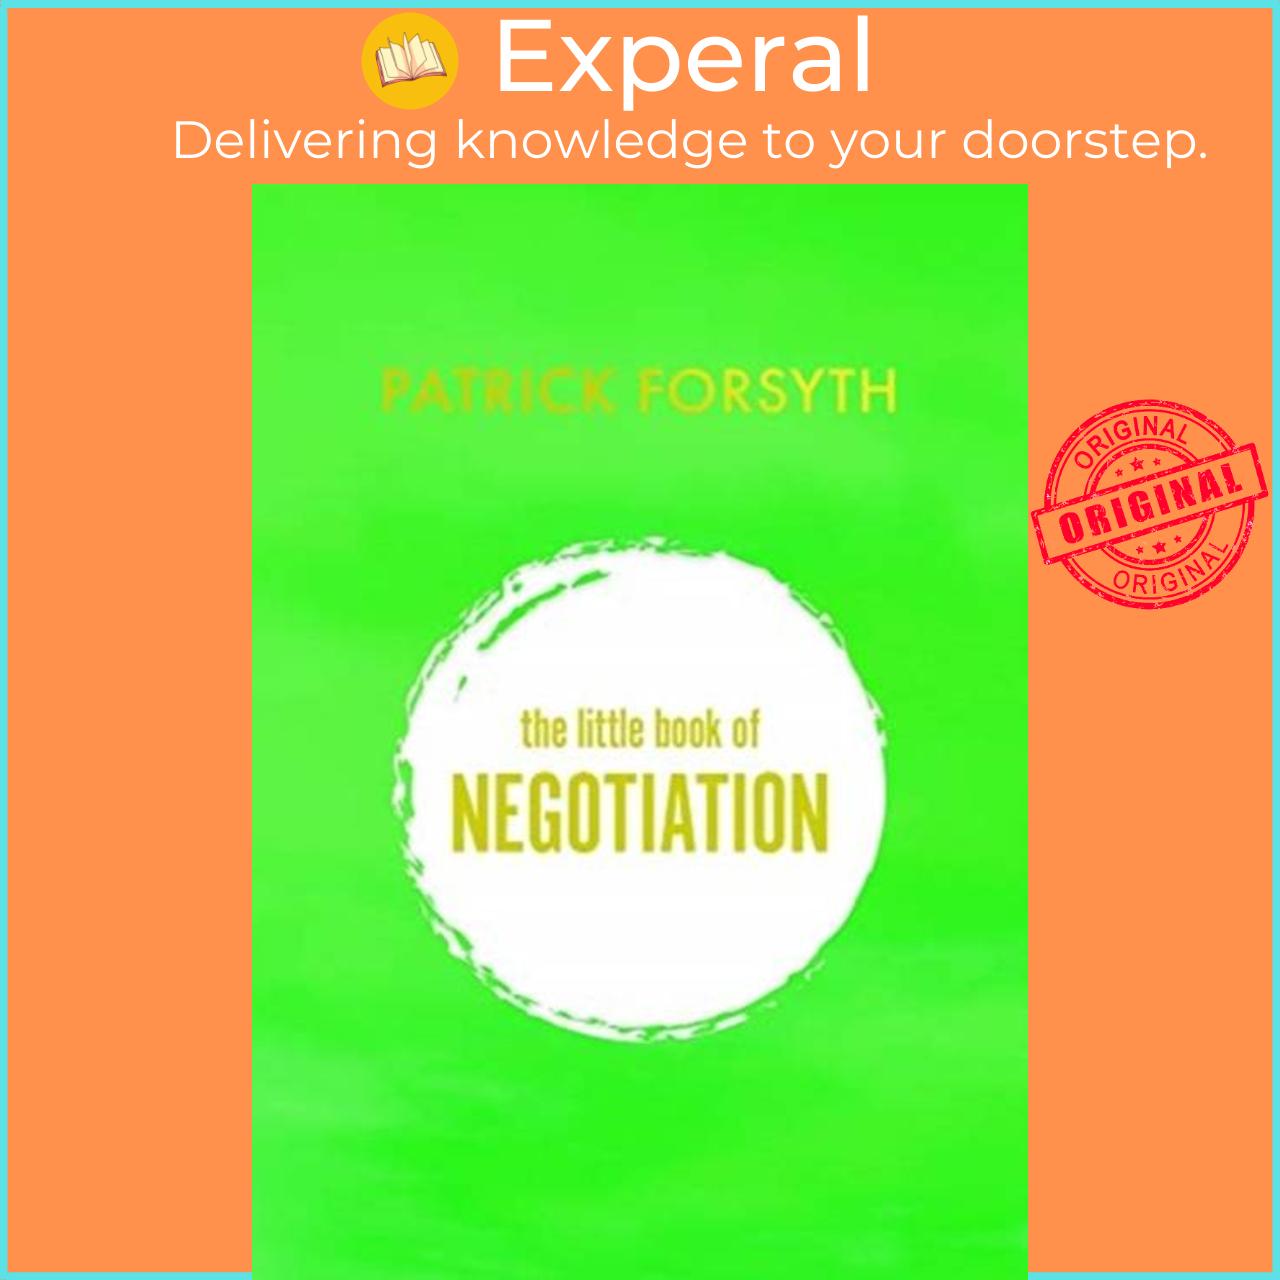 Sách - The Little Book of Negotiation - How to get what you want by Patrick Forsyth (UK edition, hardcover)